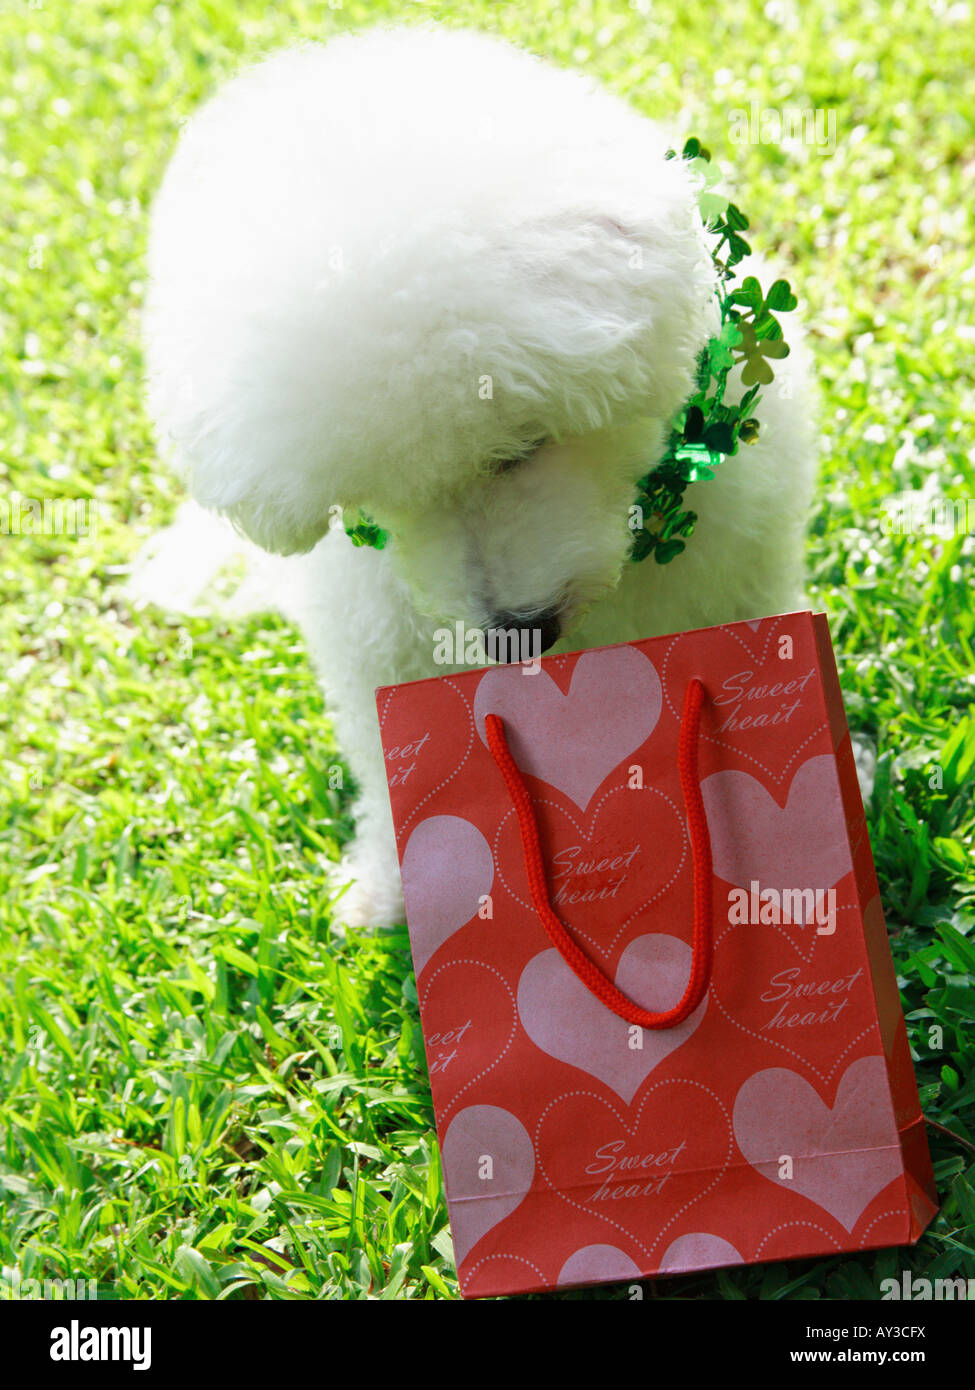 Bichon Frise sitting on grass and smelling at a shopping bag Stock Photo